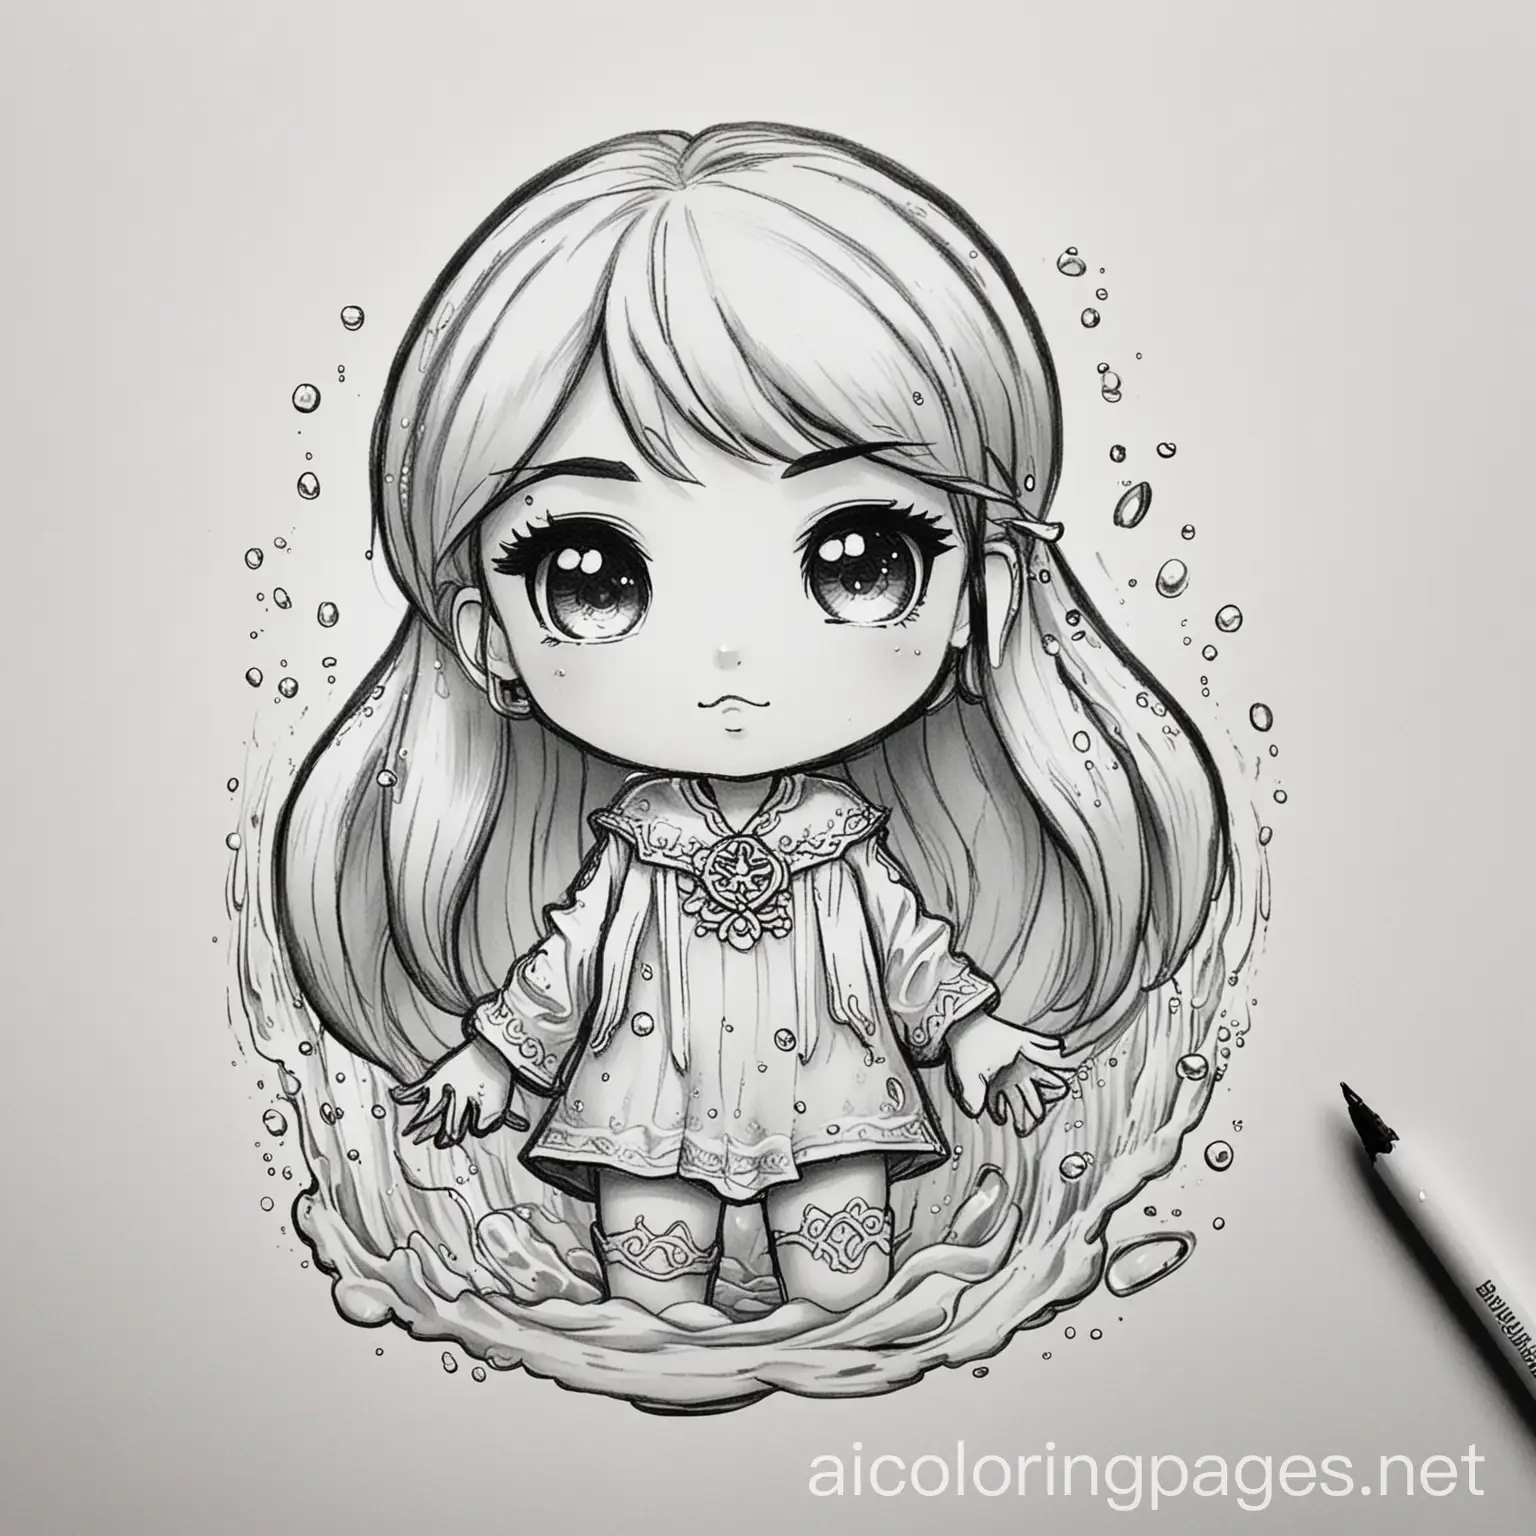 A chibi girl with elemental powers of water coloring book line art, Coloring Page, black and white, line art, white background, Simplicity, Ample White Space. The background of the coloring page is plain white to make it easy for young children to color within the lines. The outlines of all the subjects are easy to distinguish, making it simple for kids to color without too much difficulty